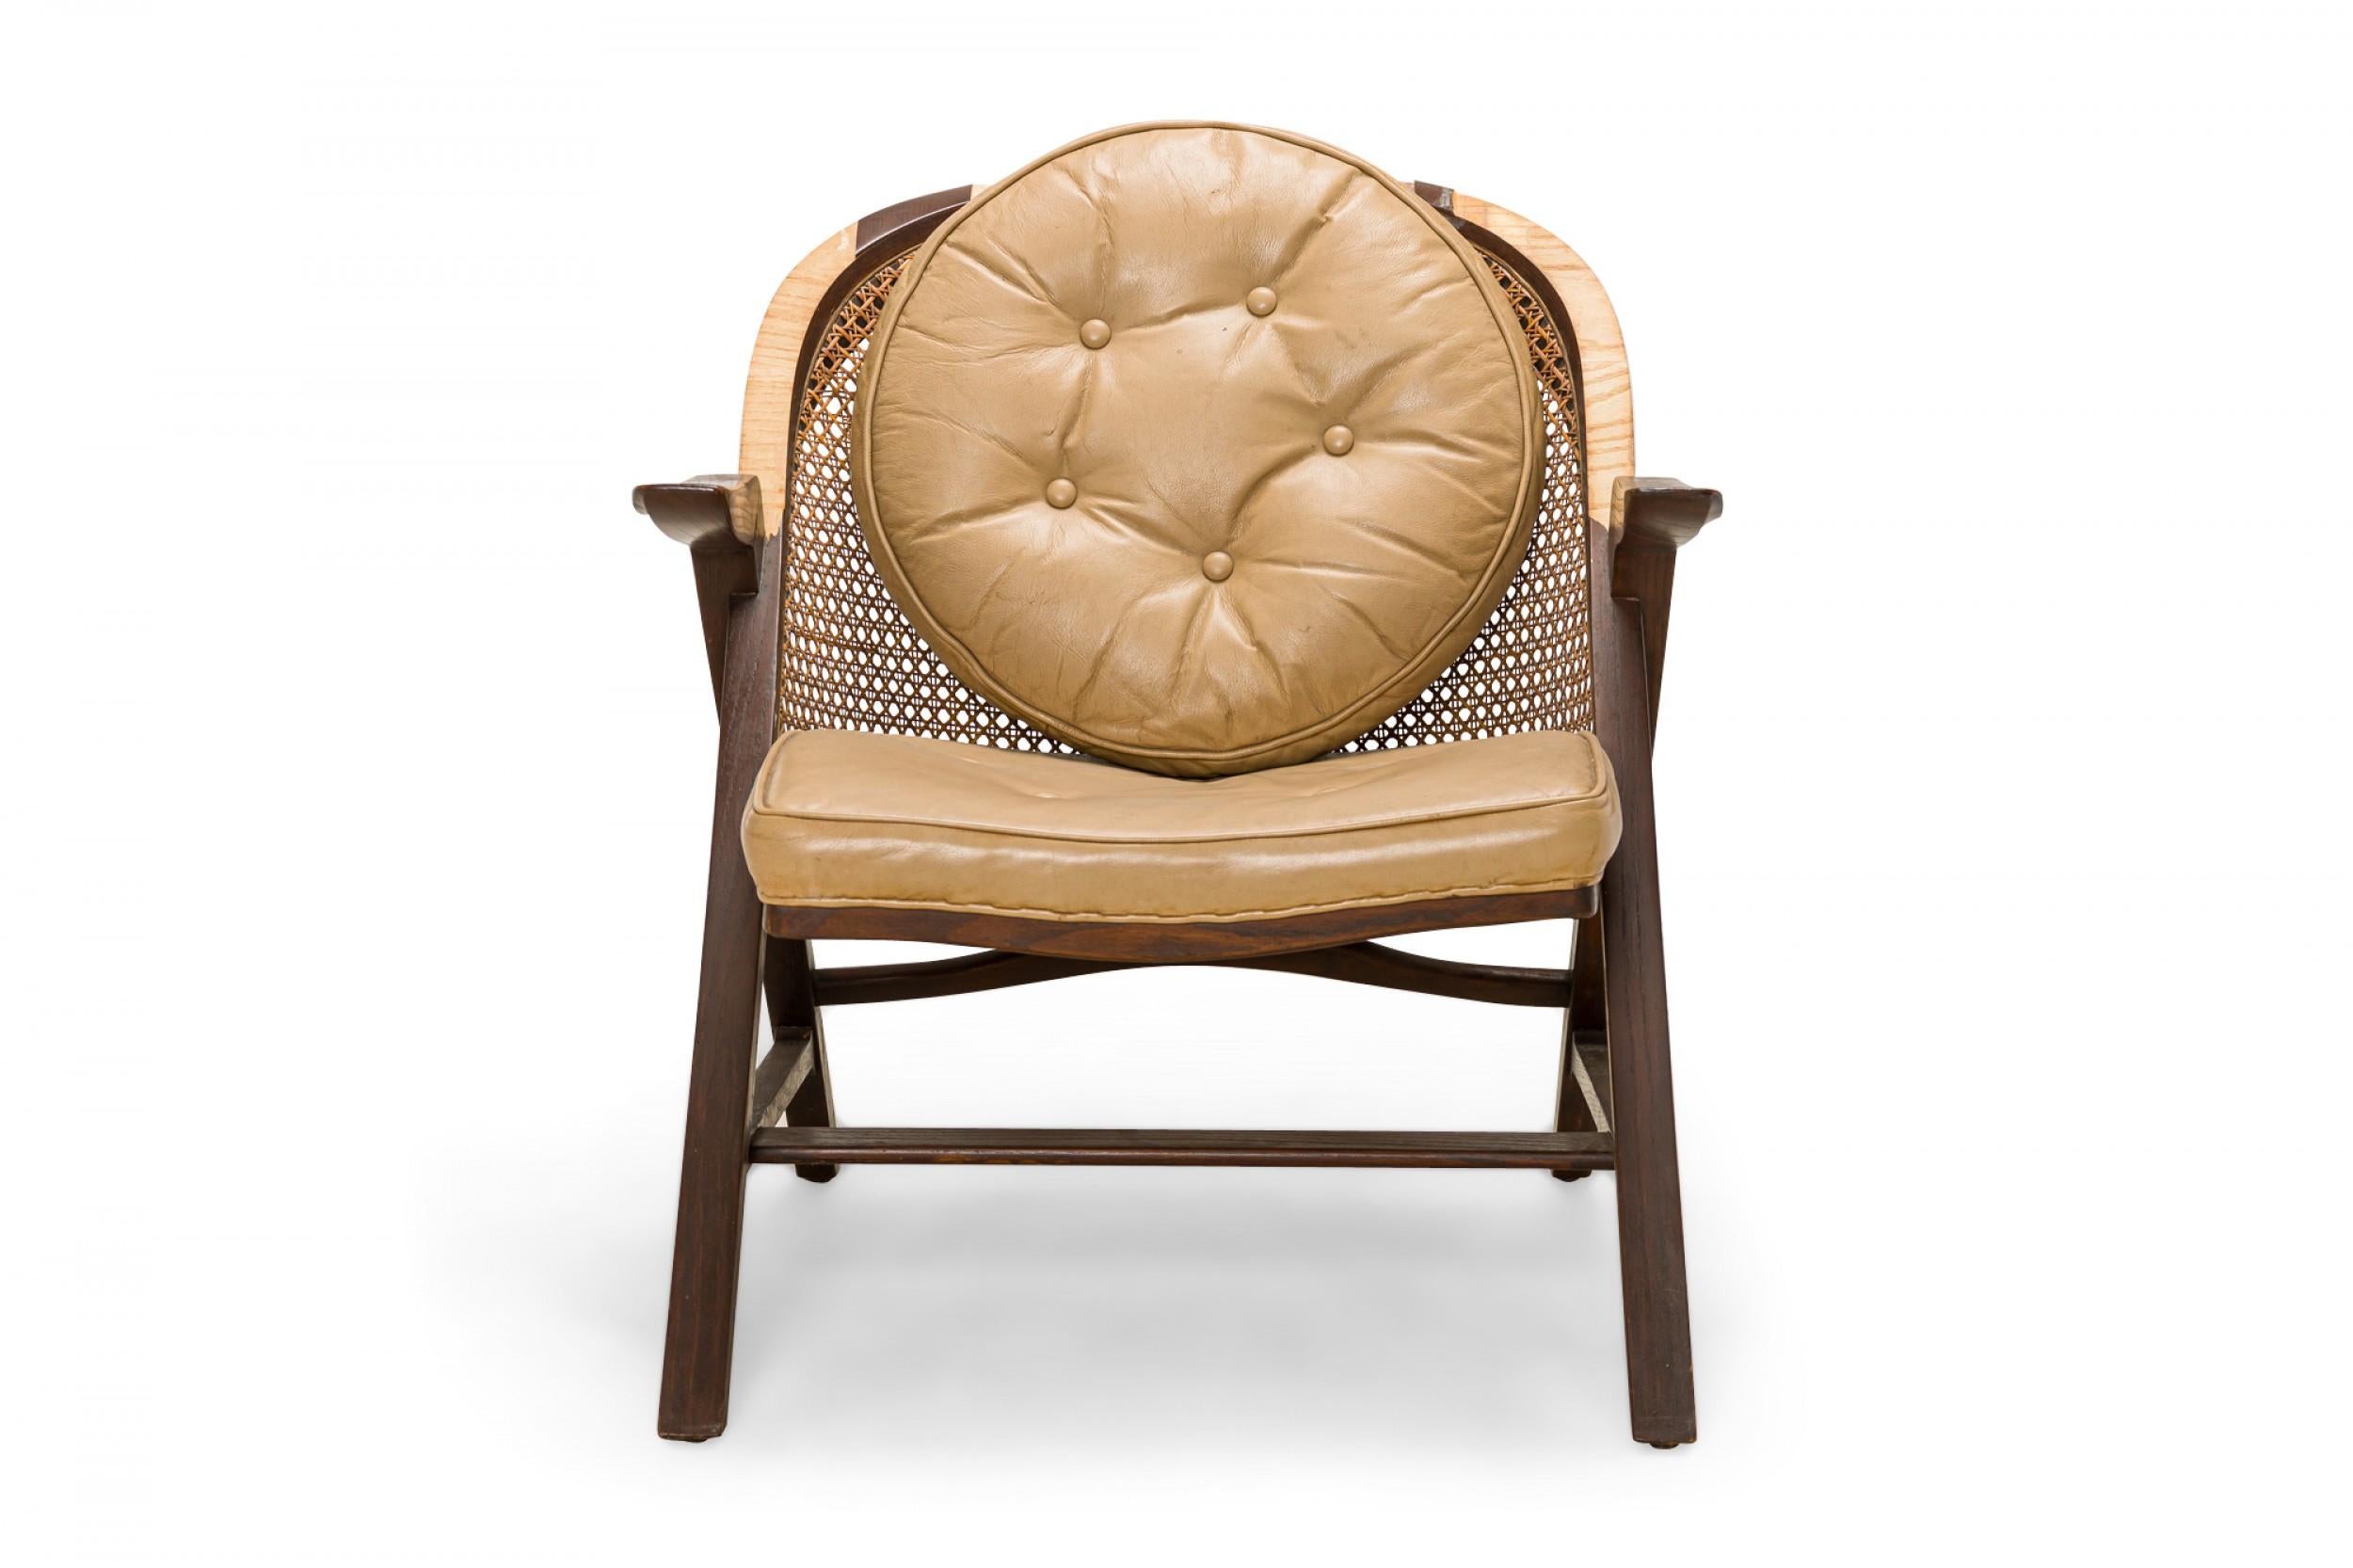 American Mid-Century 'Janus' lounge / armchair with a wooden frame with dark walnut veneer, a rounded caned back, and a tan leather button tufted seat cushion and round back cushion, resting on four angled square walnut legs. (EDWARD J WORMLEY FOR